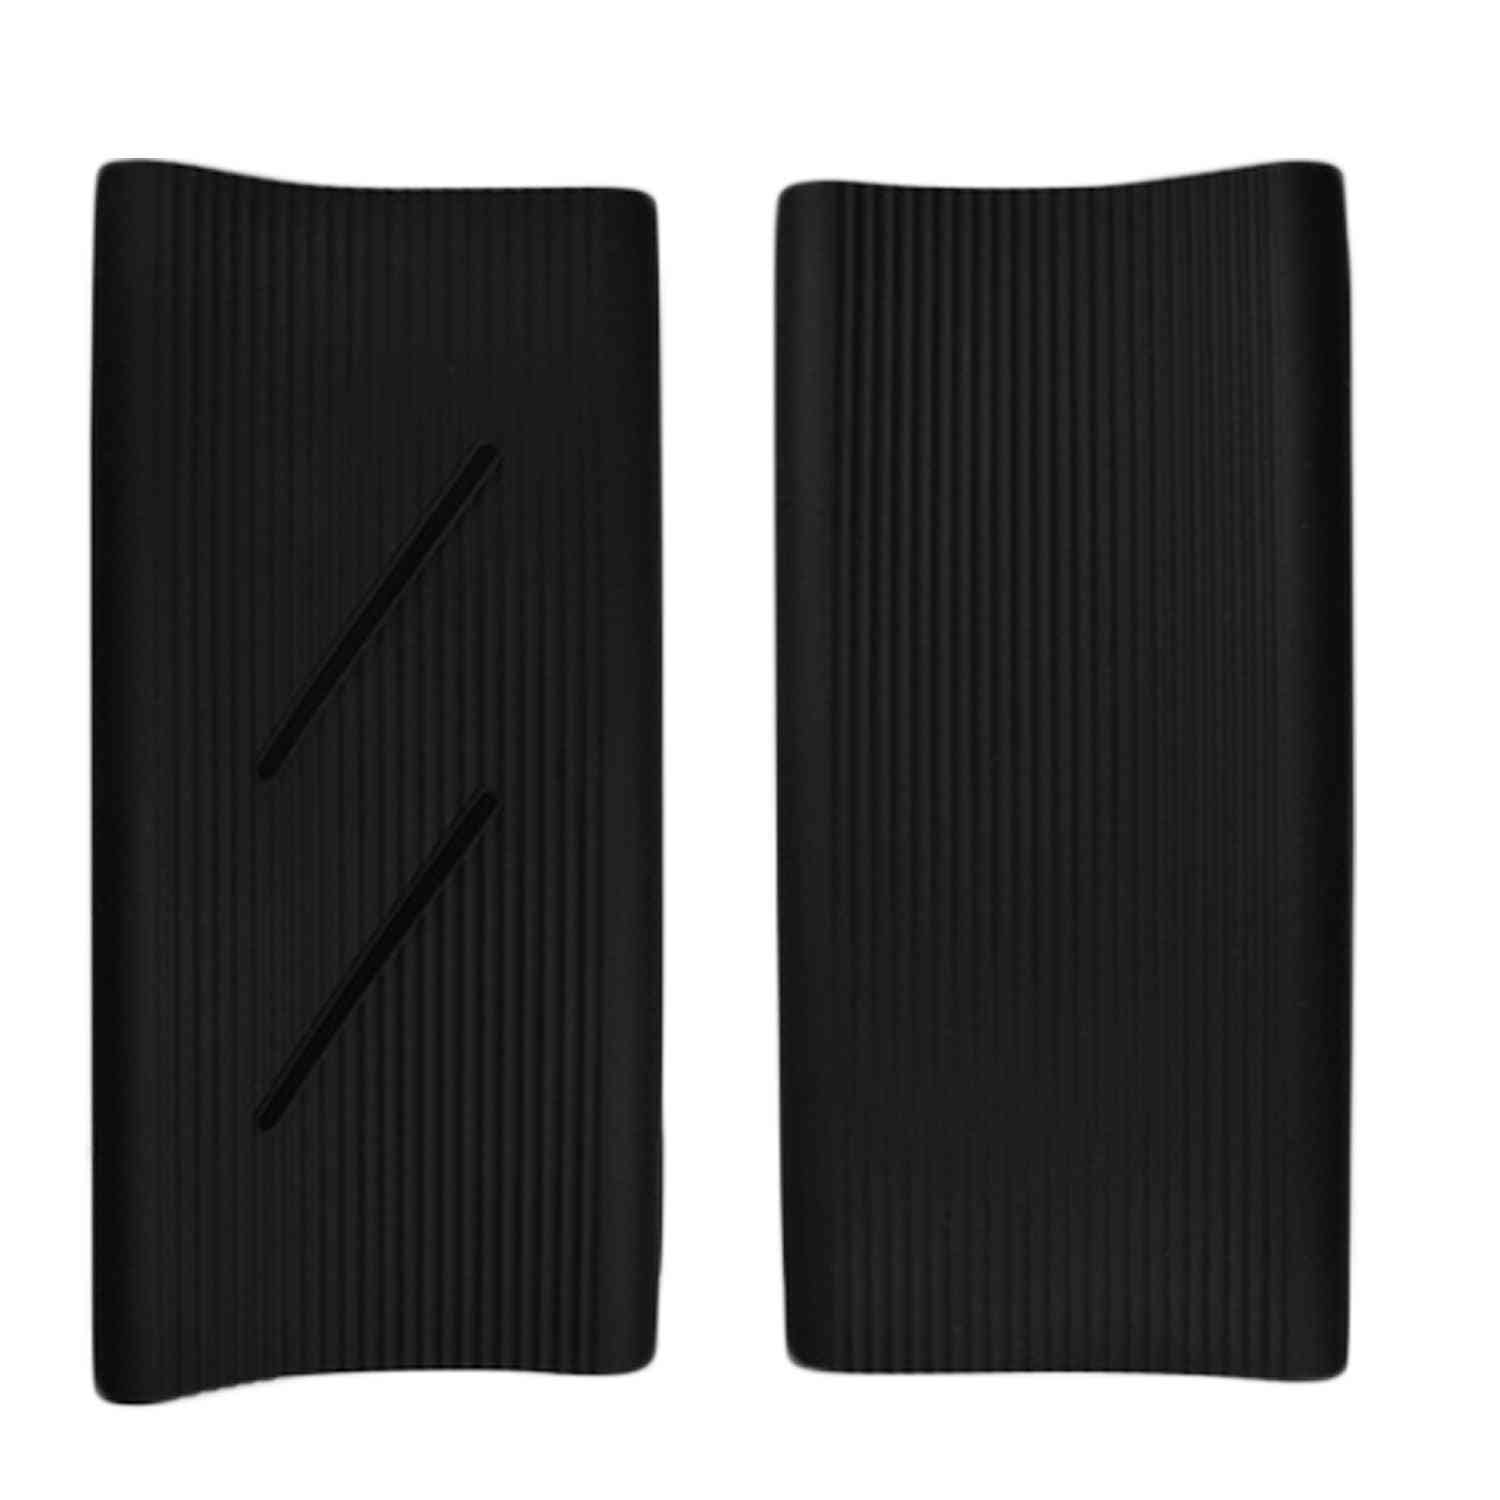 Soft Rubber Silicone Case Cover, Skin Sleeve Protector - Power Bank Accessories